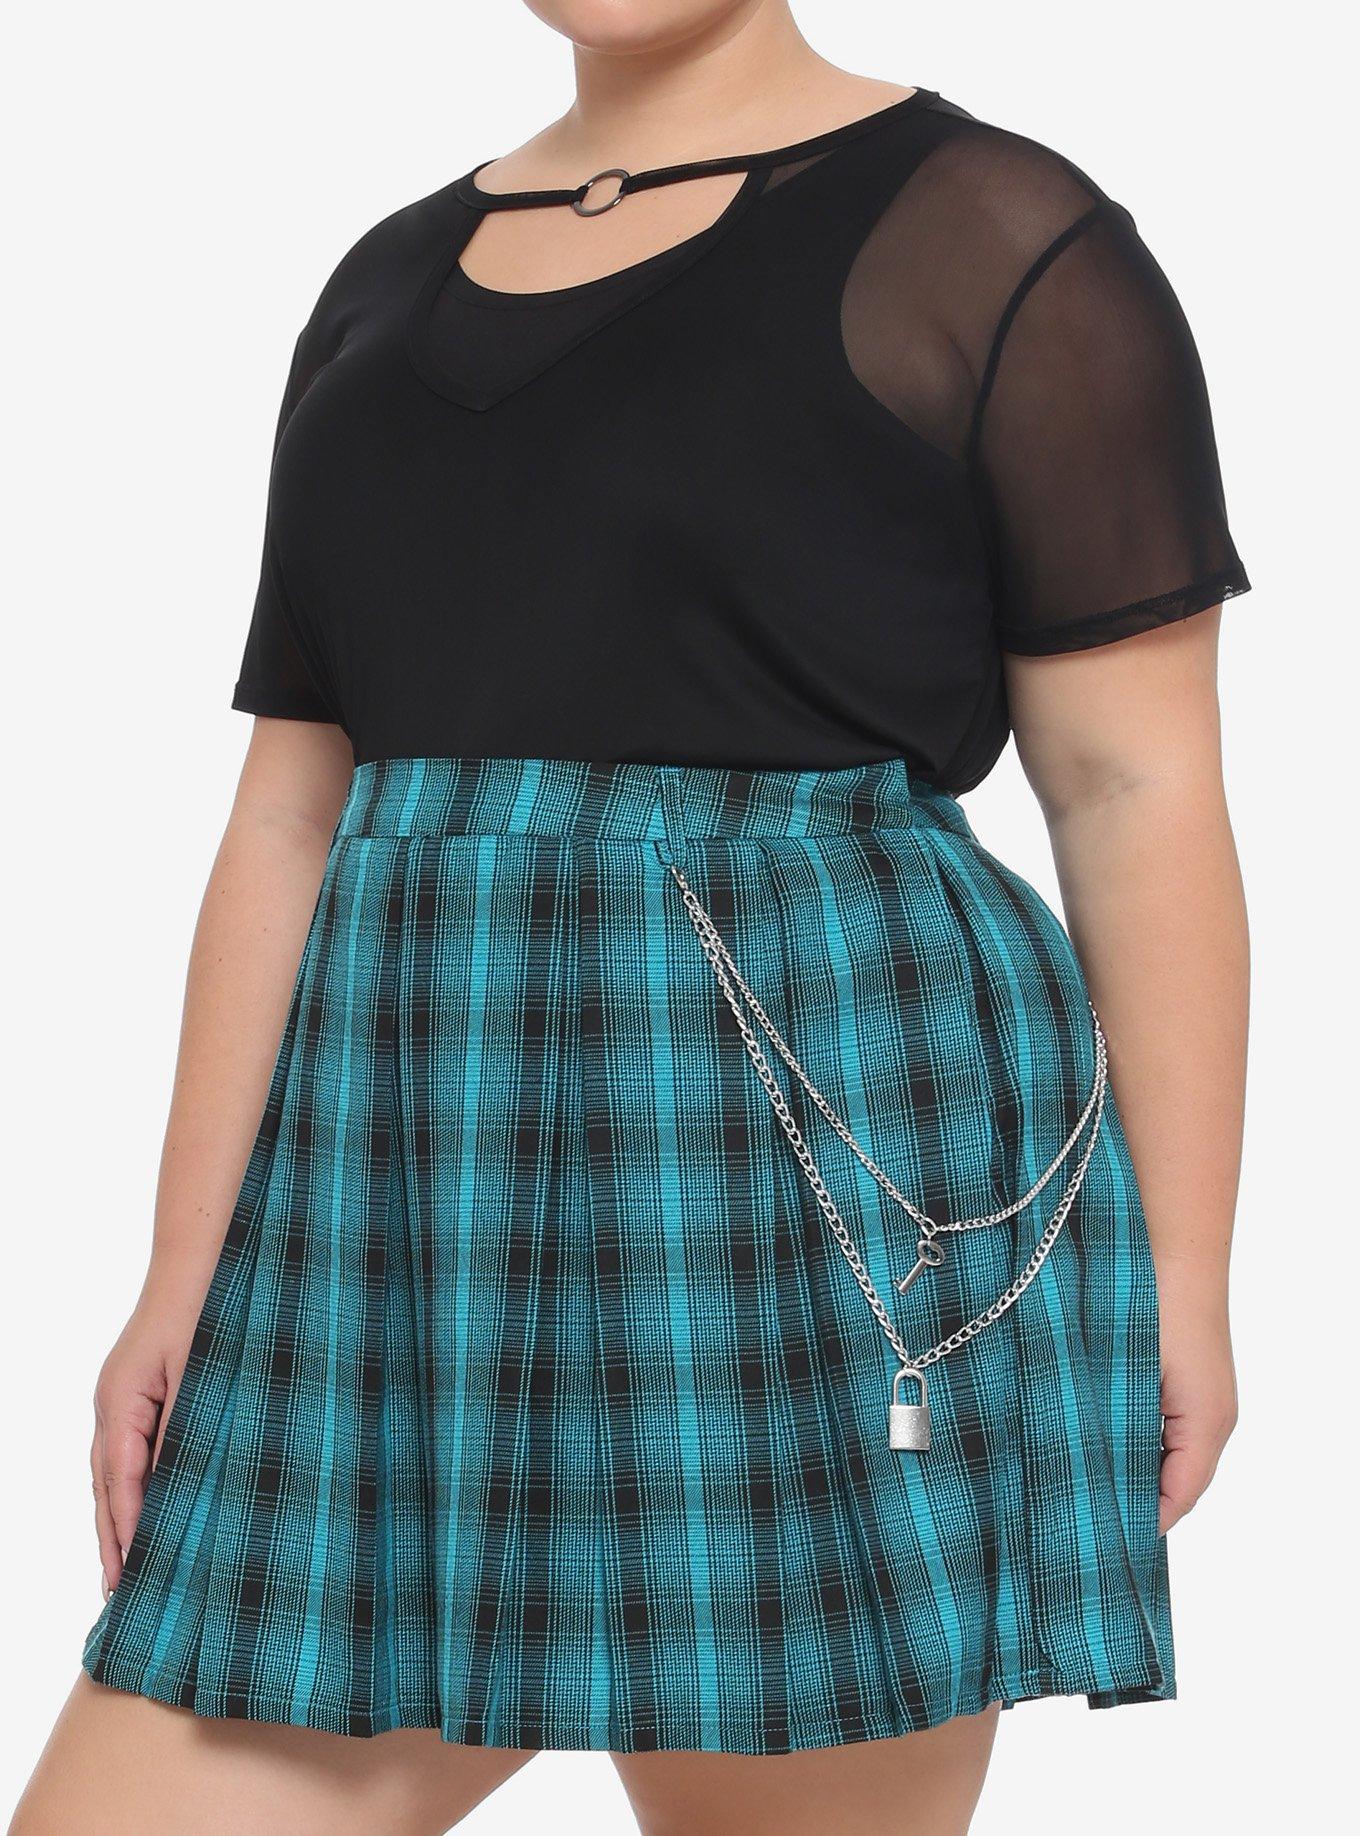 Teal Plaid Pleated Chain Skirt Plus Size, TEAL, hi-res